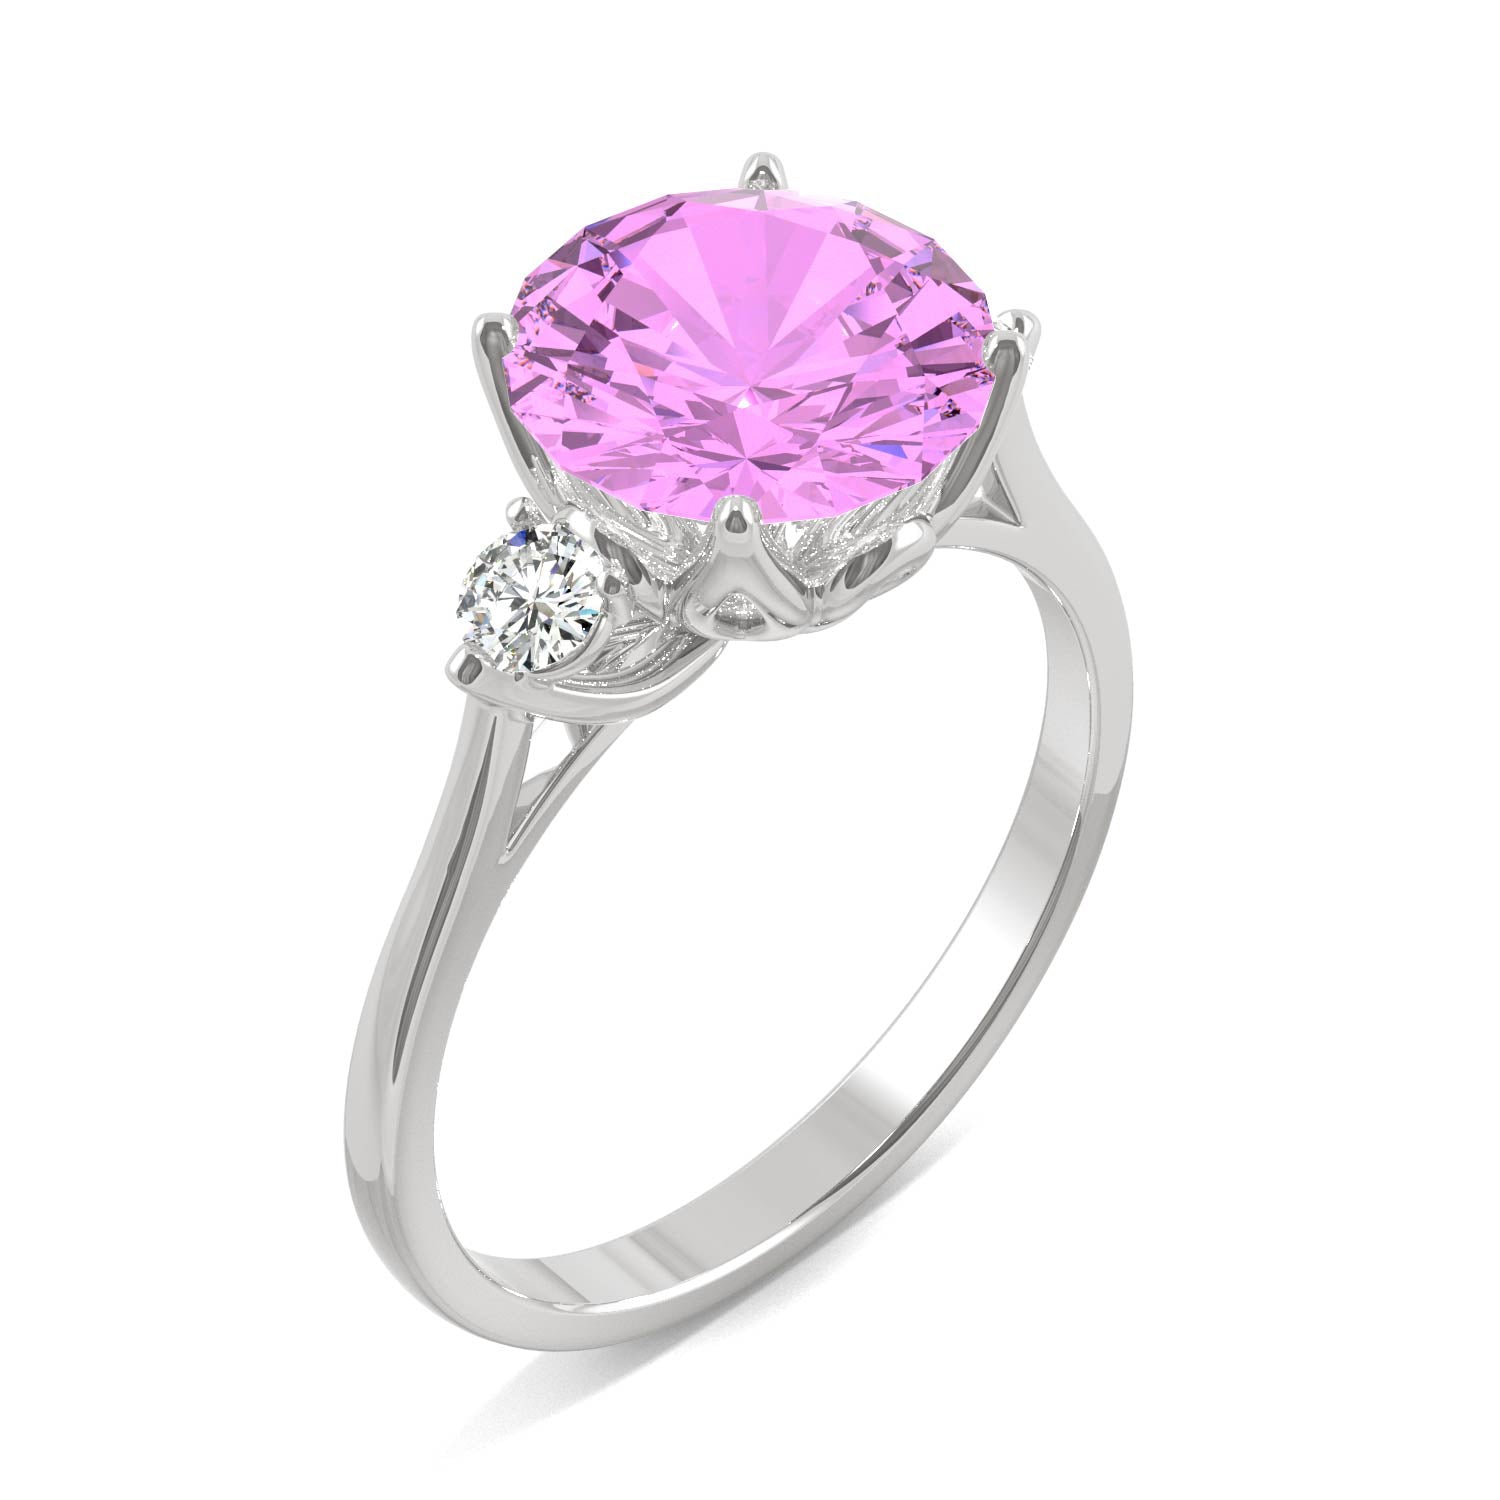 3.55 CTW DEW Round Pink Sapphire Engagement Ring in 14K White Gold